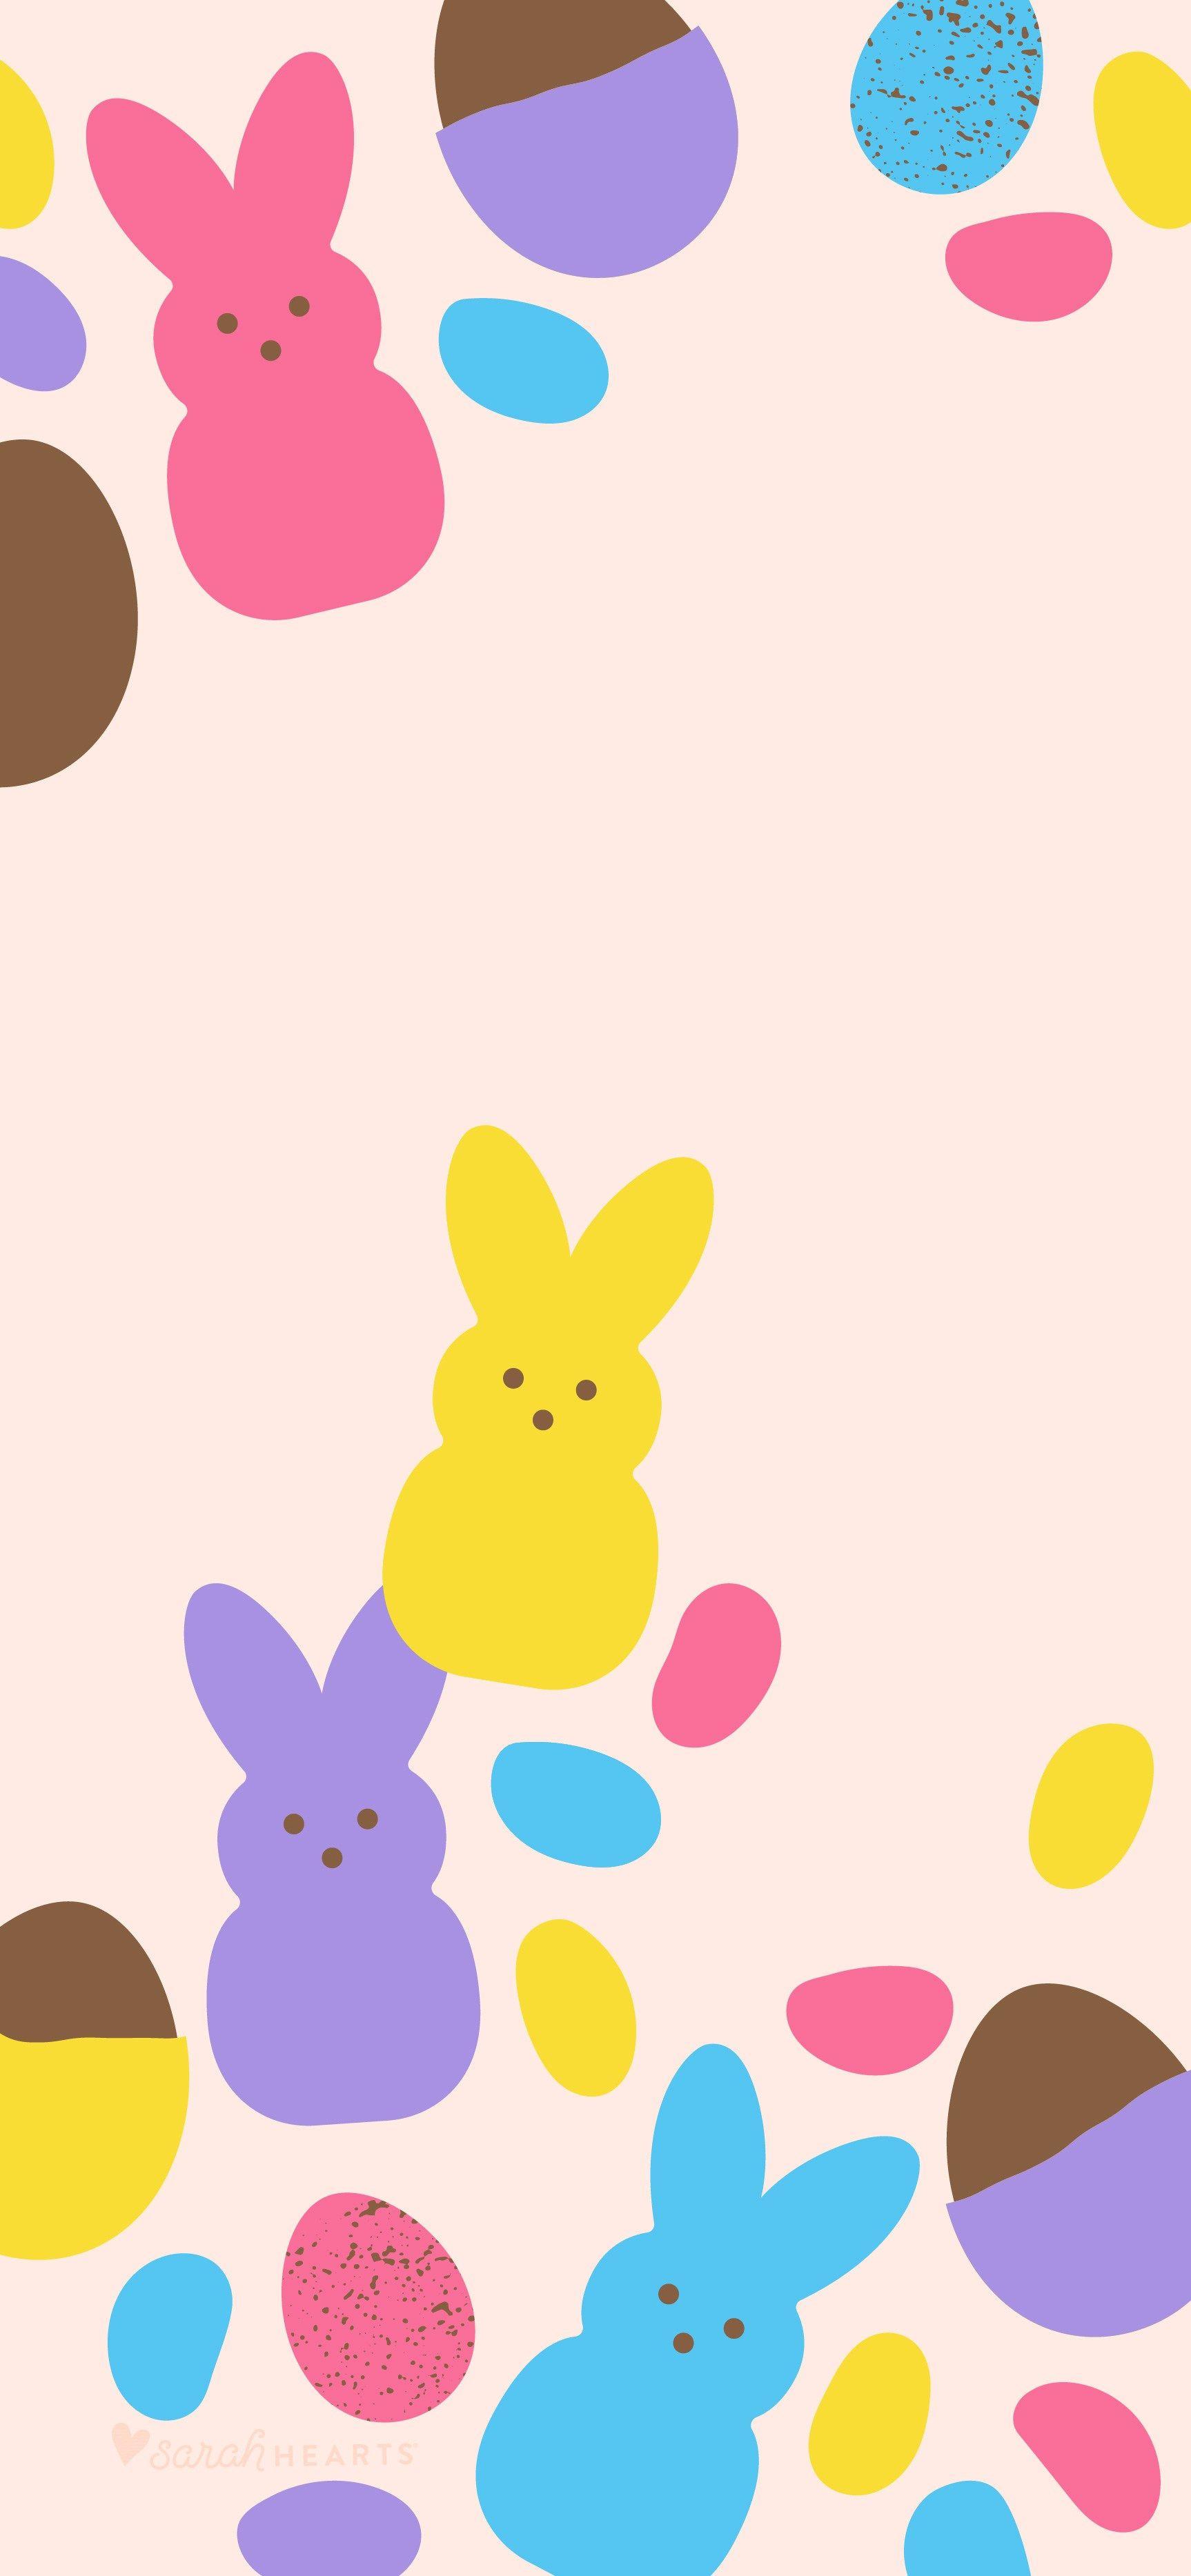 1080x1920 Easter Egg Wallpapers for Android Mobile Smartphone Full HD